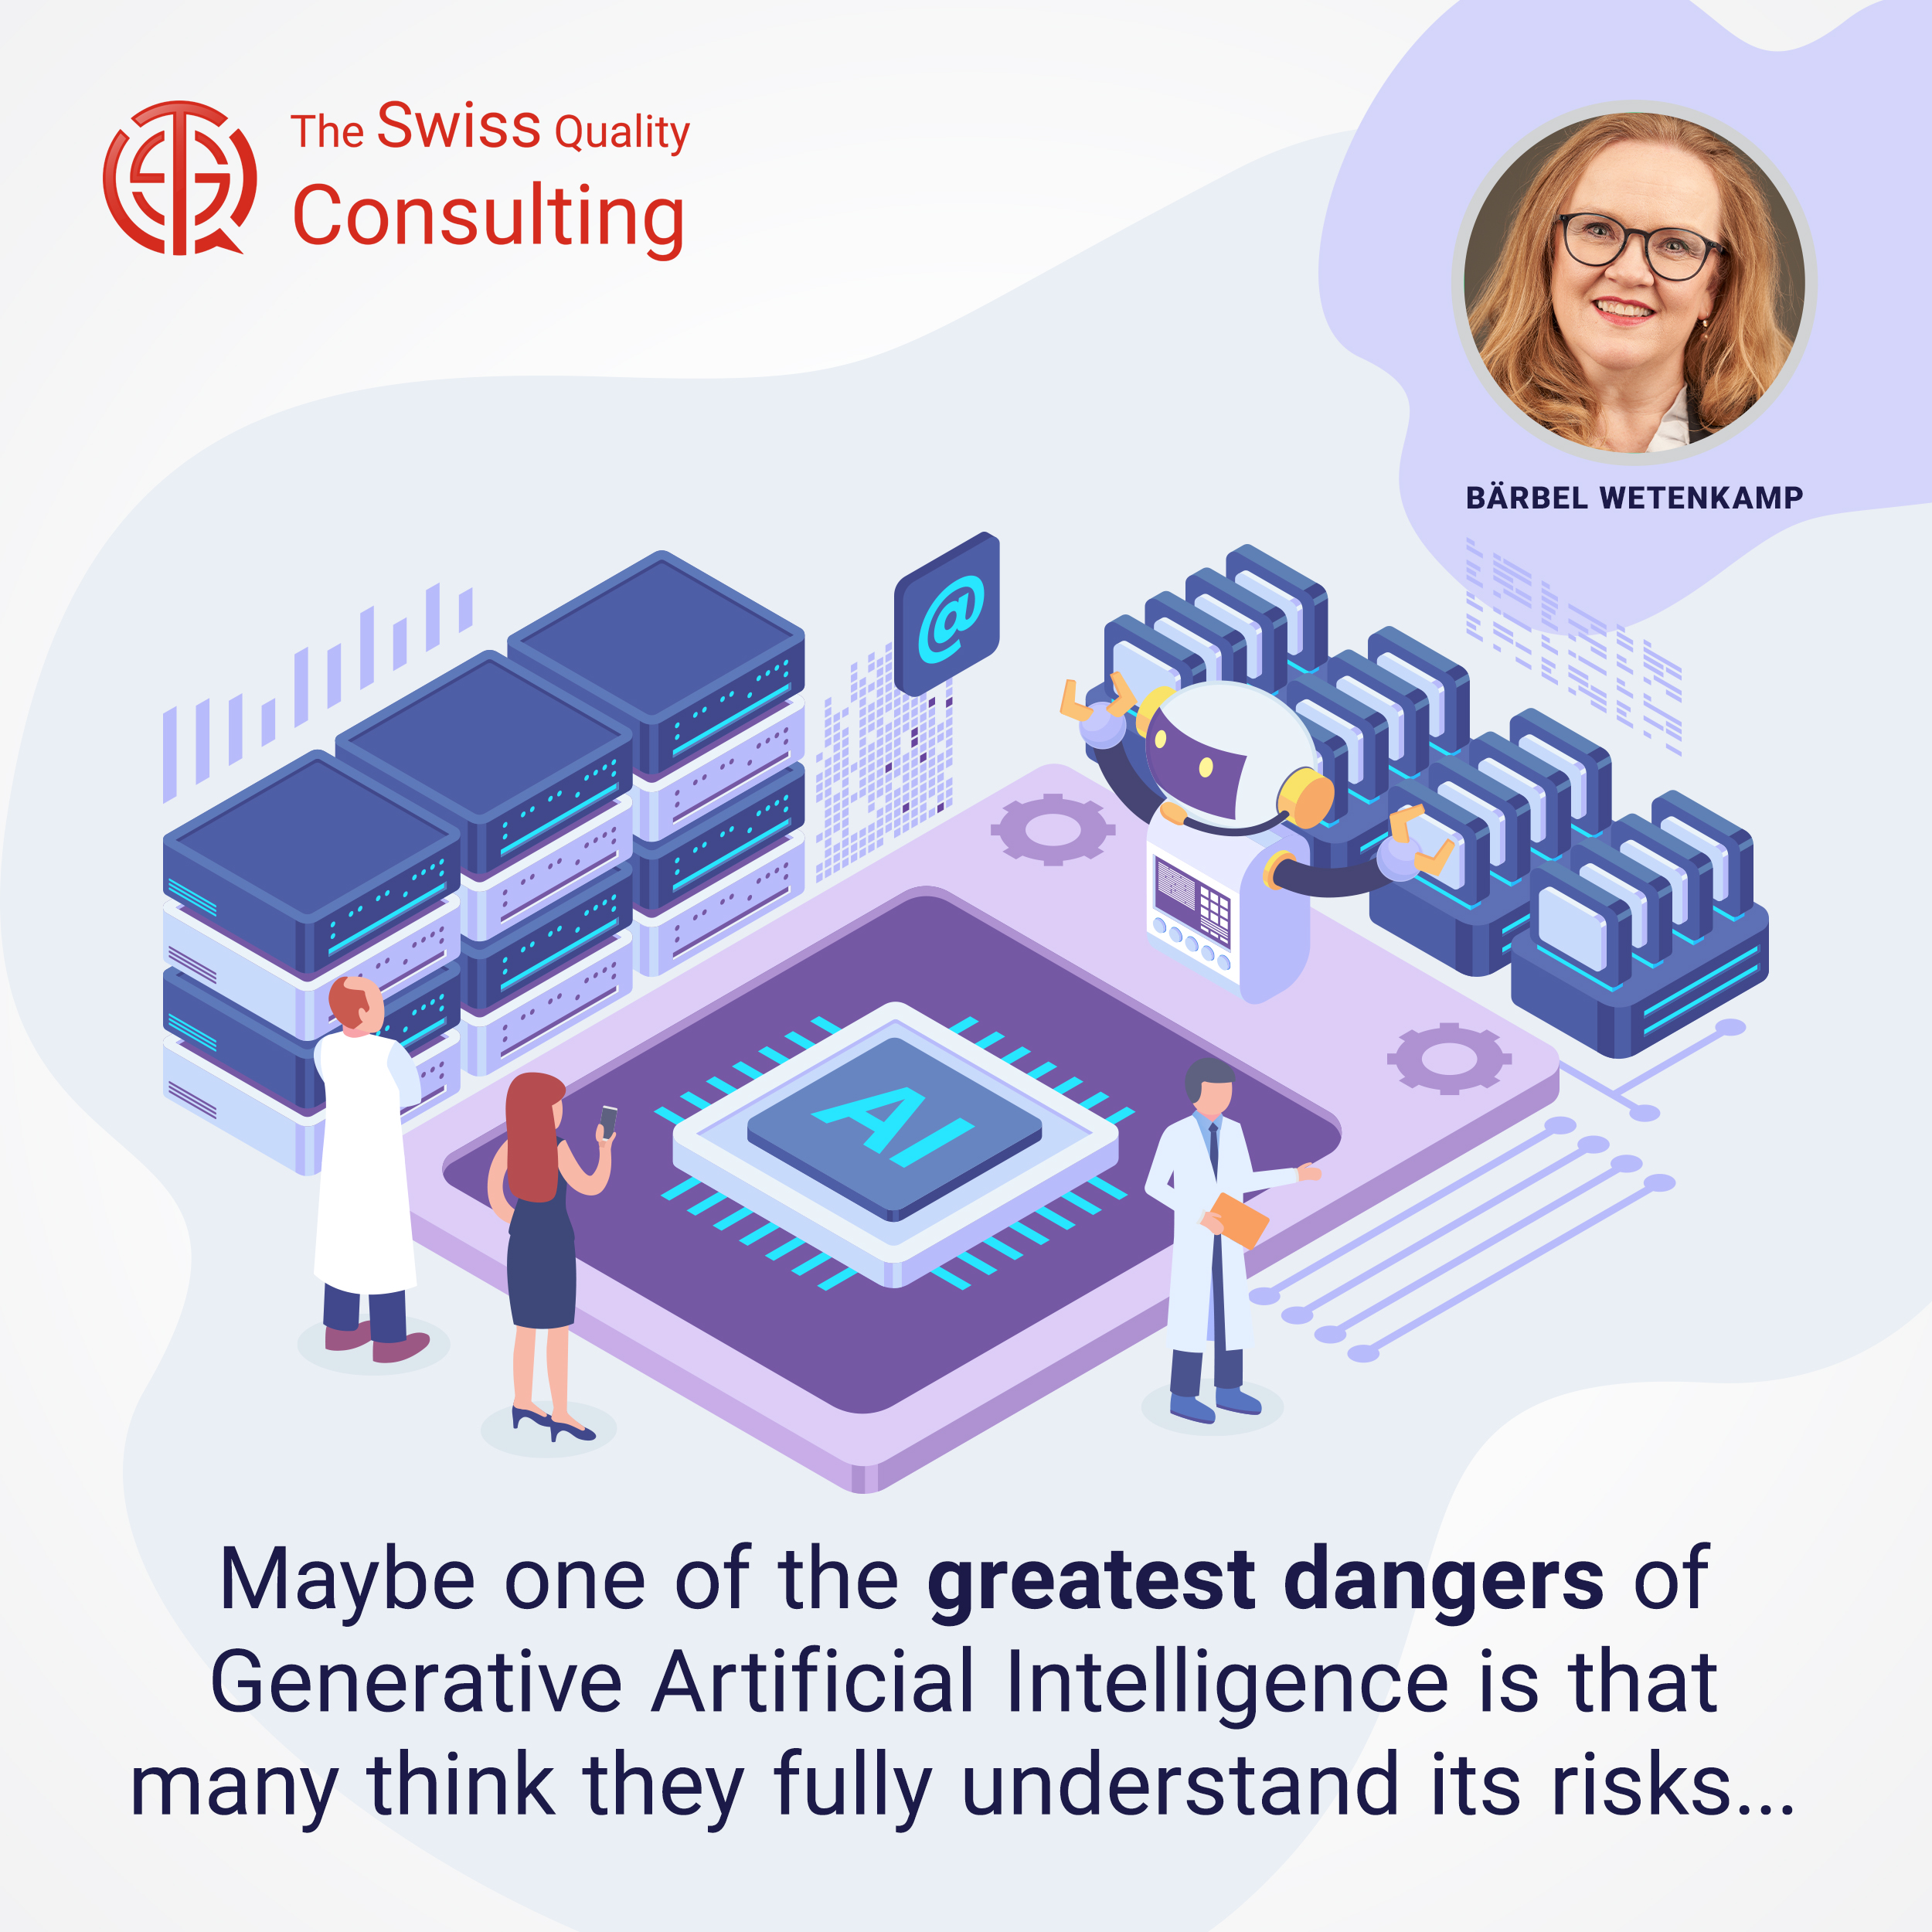 Maybe one of the greatest dangers of Generative Artificial Intelligence is that many think they fully understand its risks... 